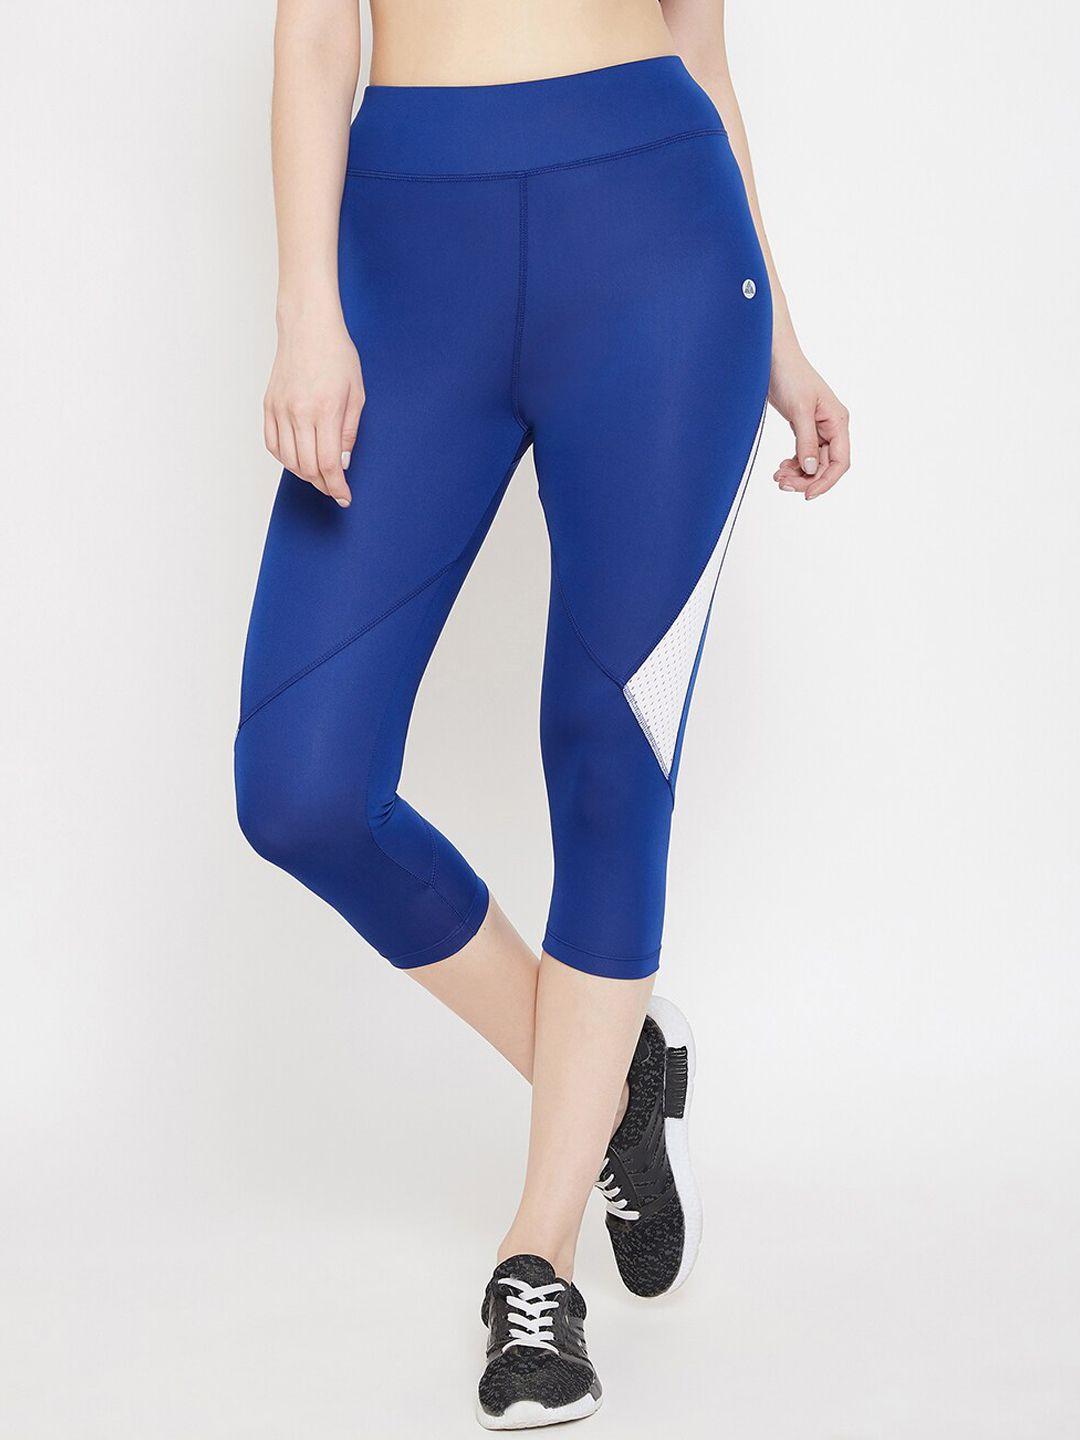 athlisis women blue solid quick dry training tights